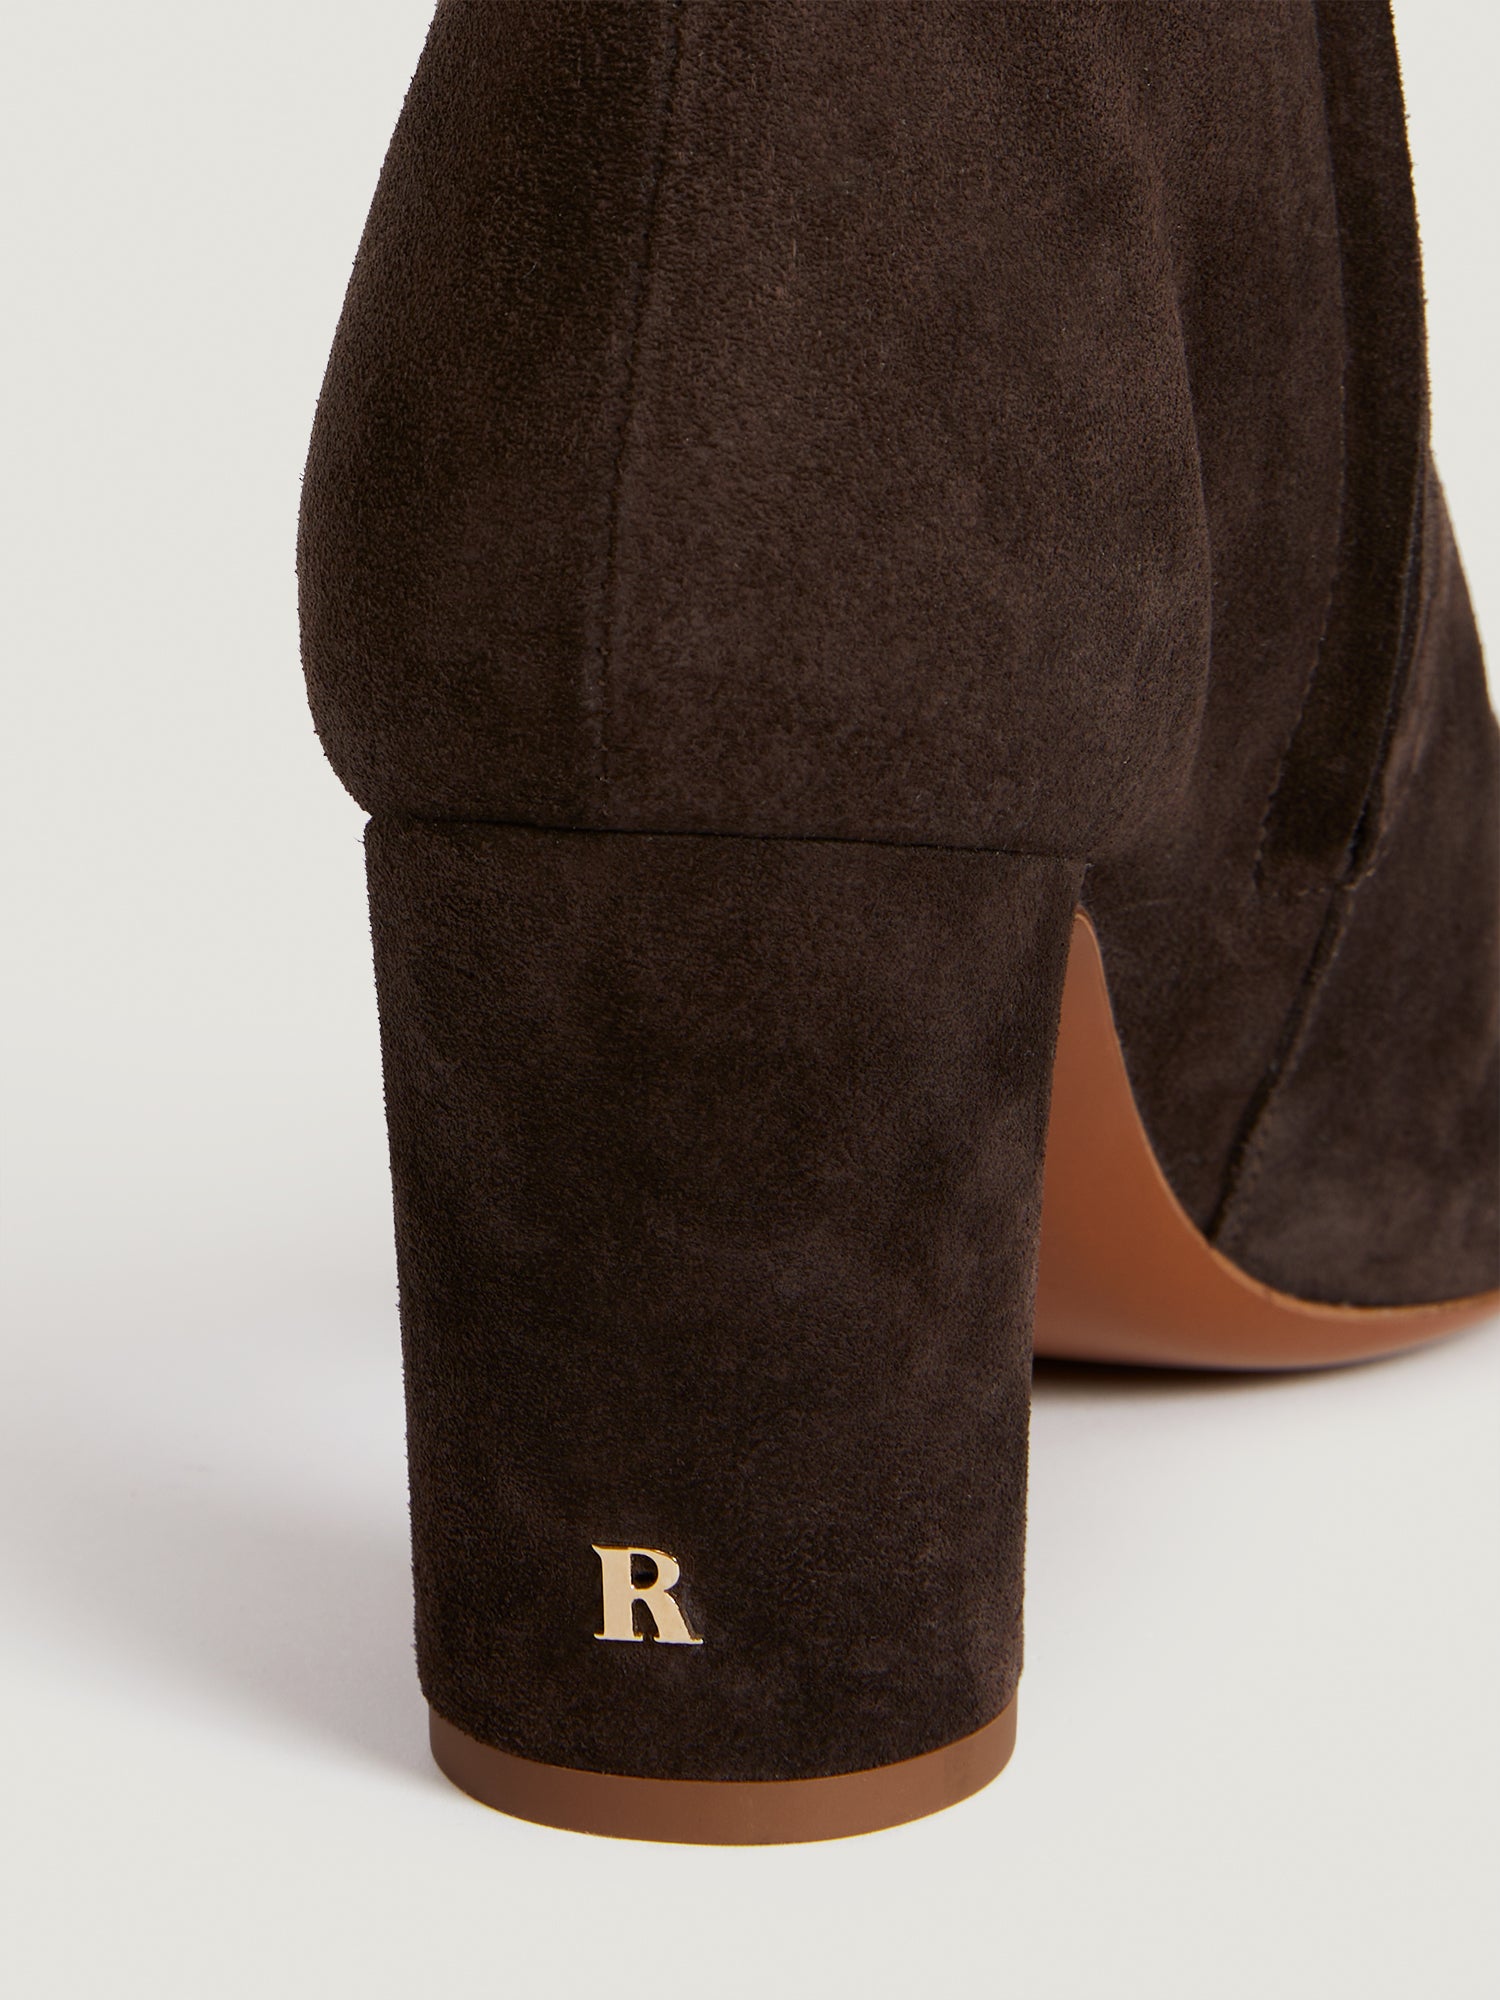 Leather boots in brown suede leather | Rouje